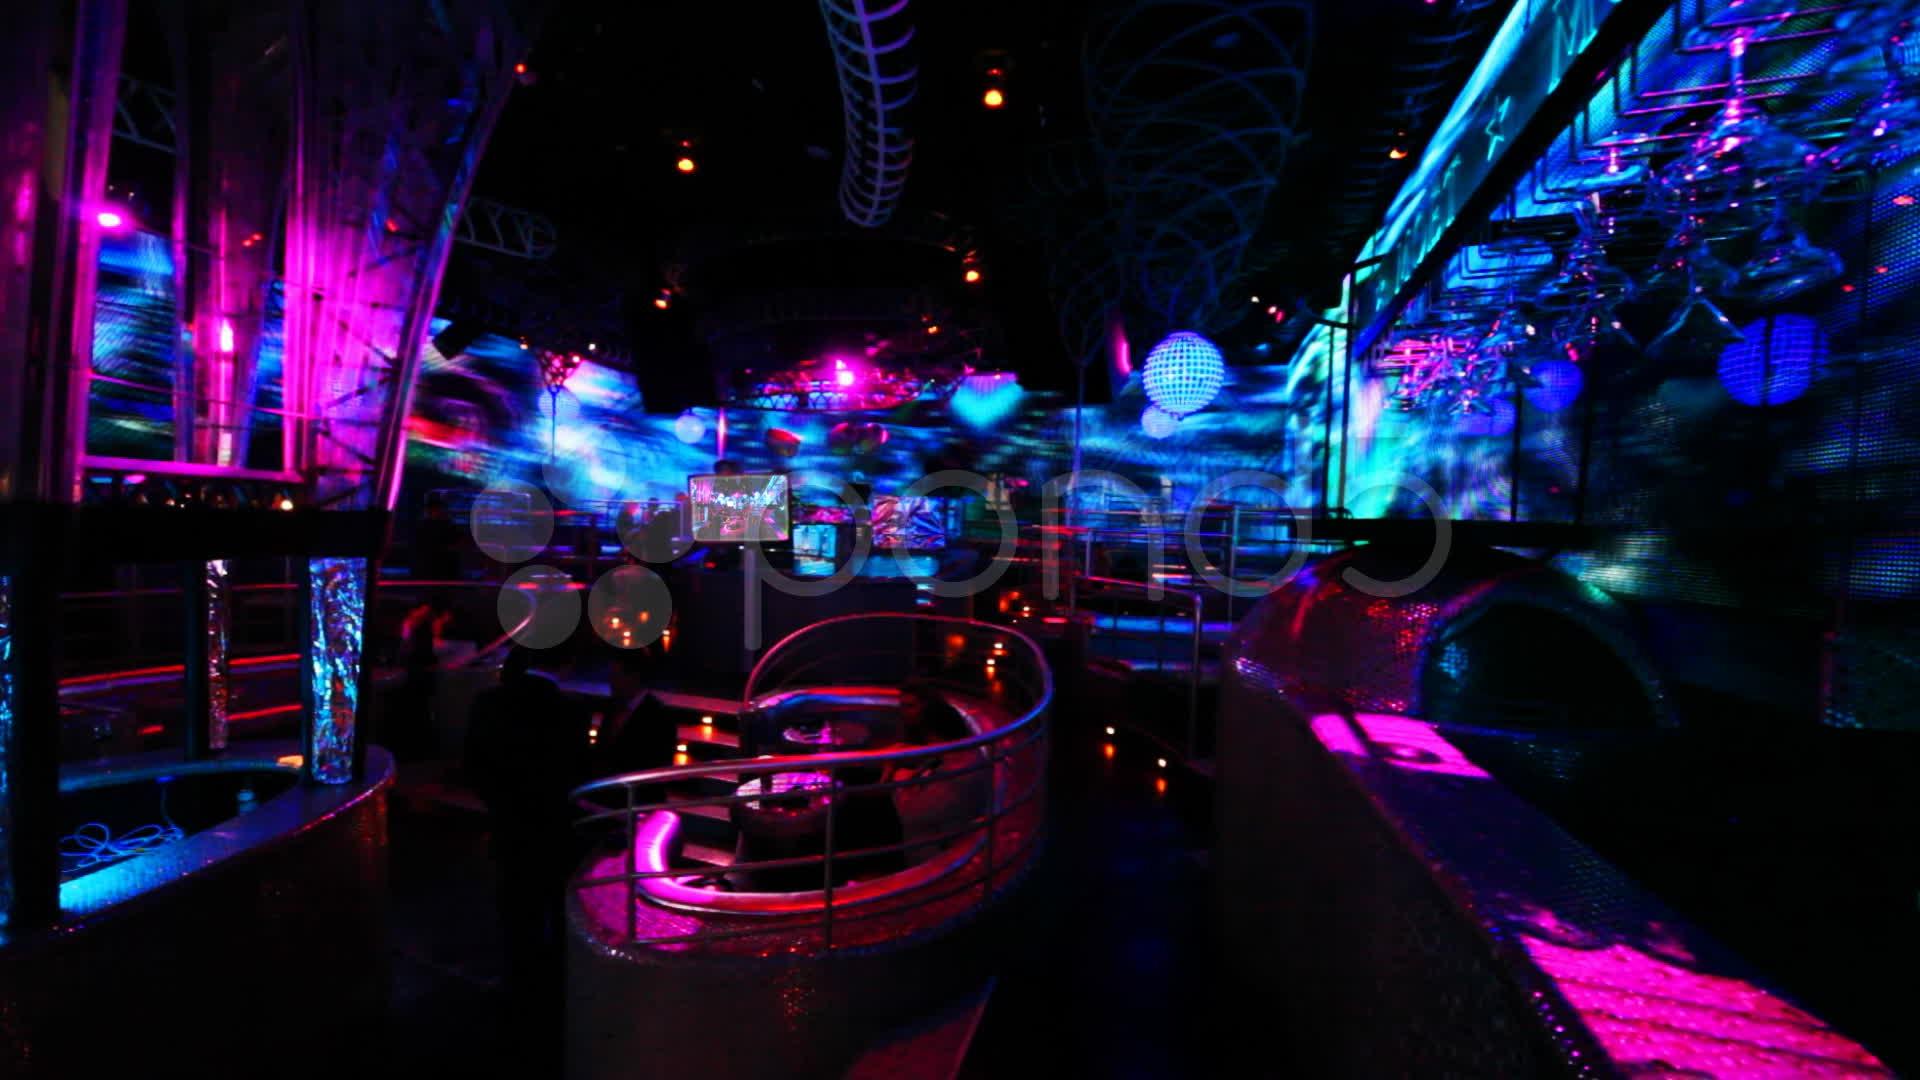 People in nightclub with bright LED illumination on walls Video